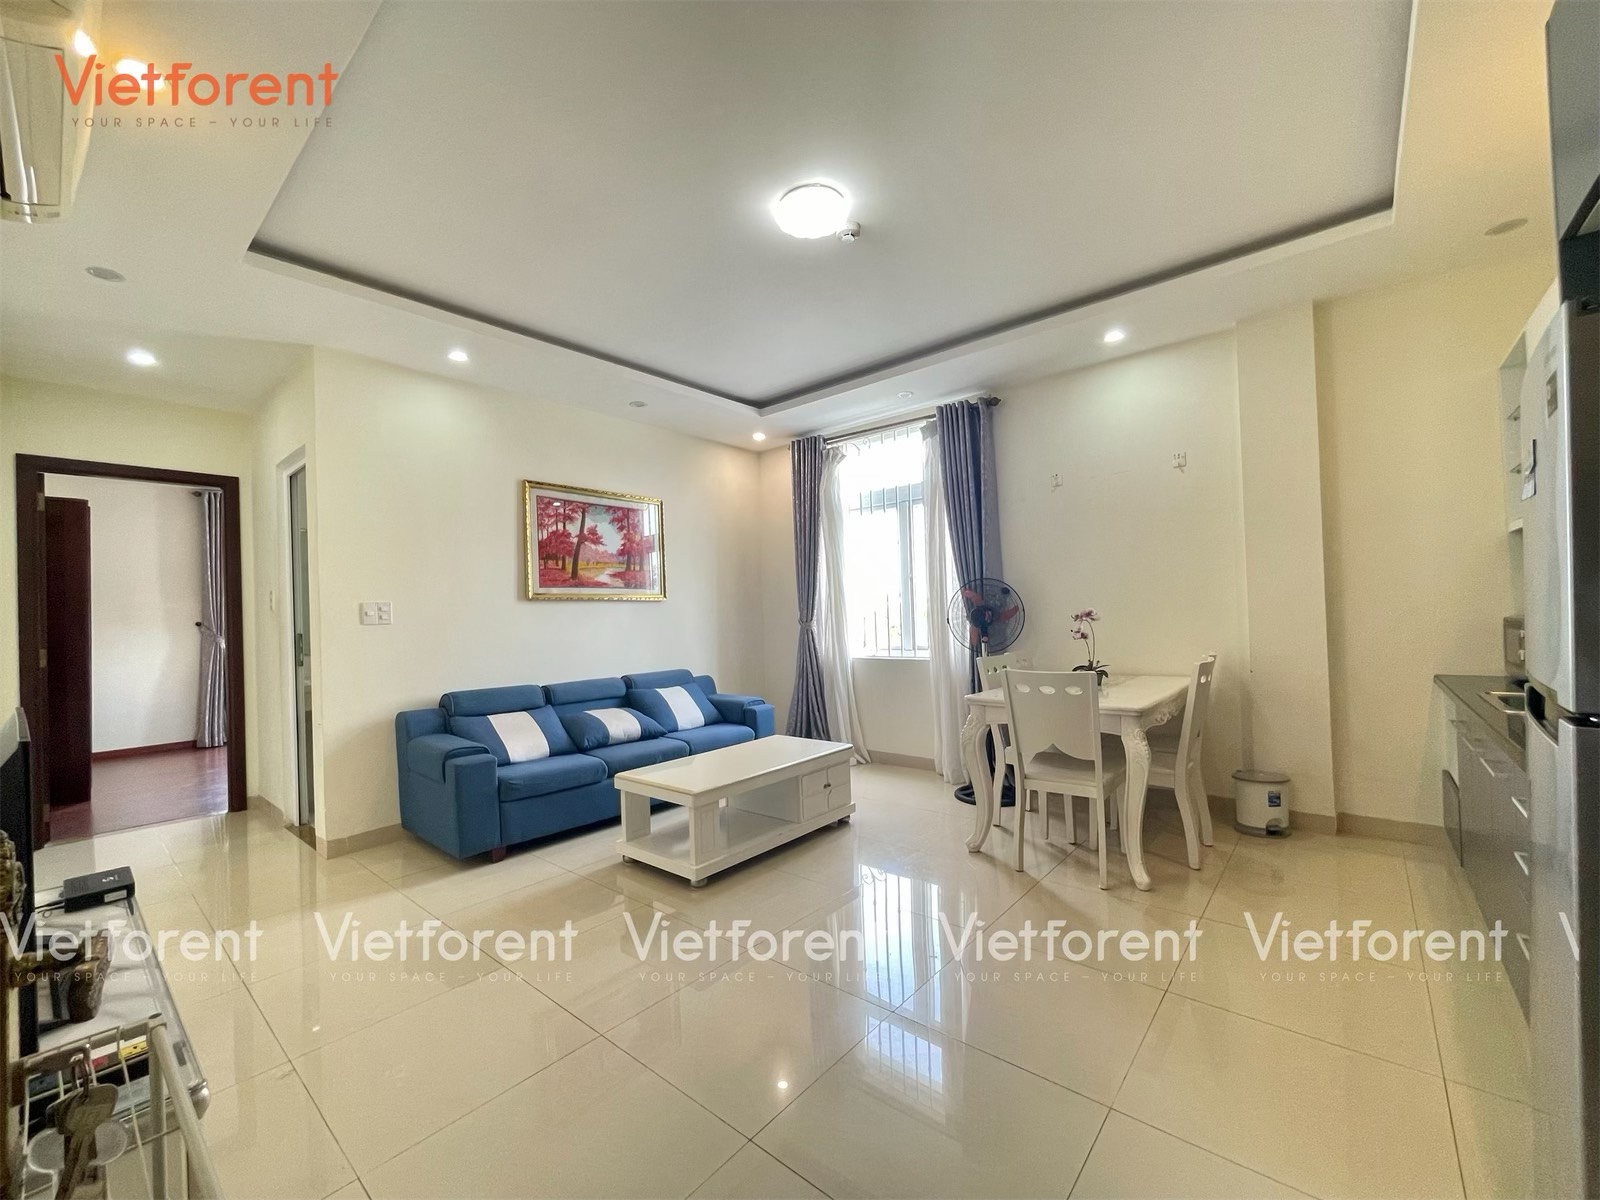 Two bedroom apartment for rent have nice view, spacious, location at An Thuong area, My An, Da Nang A541N.3